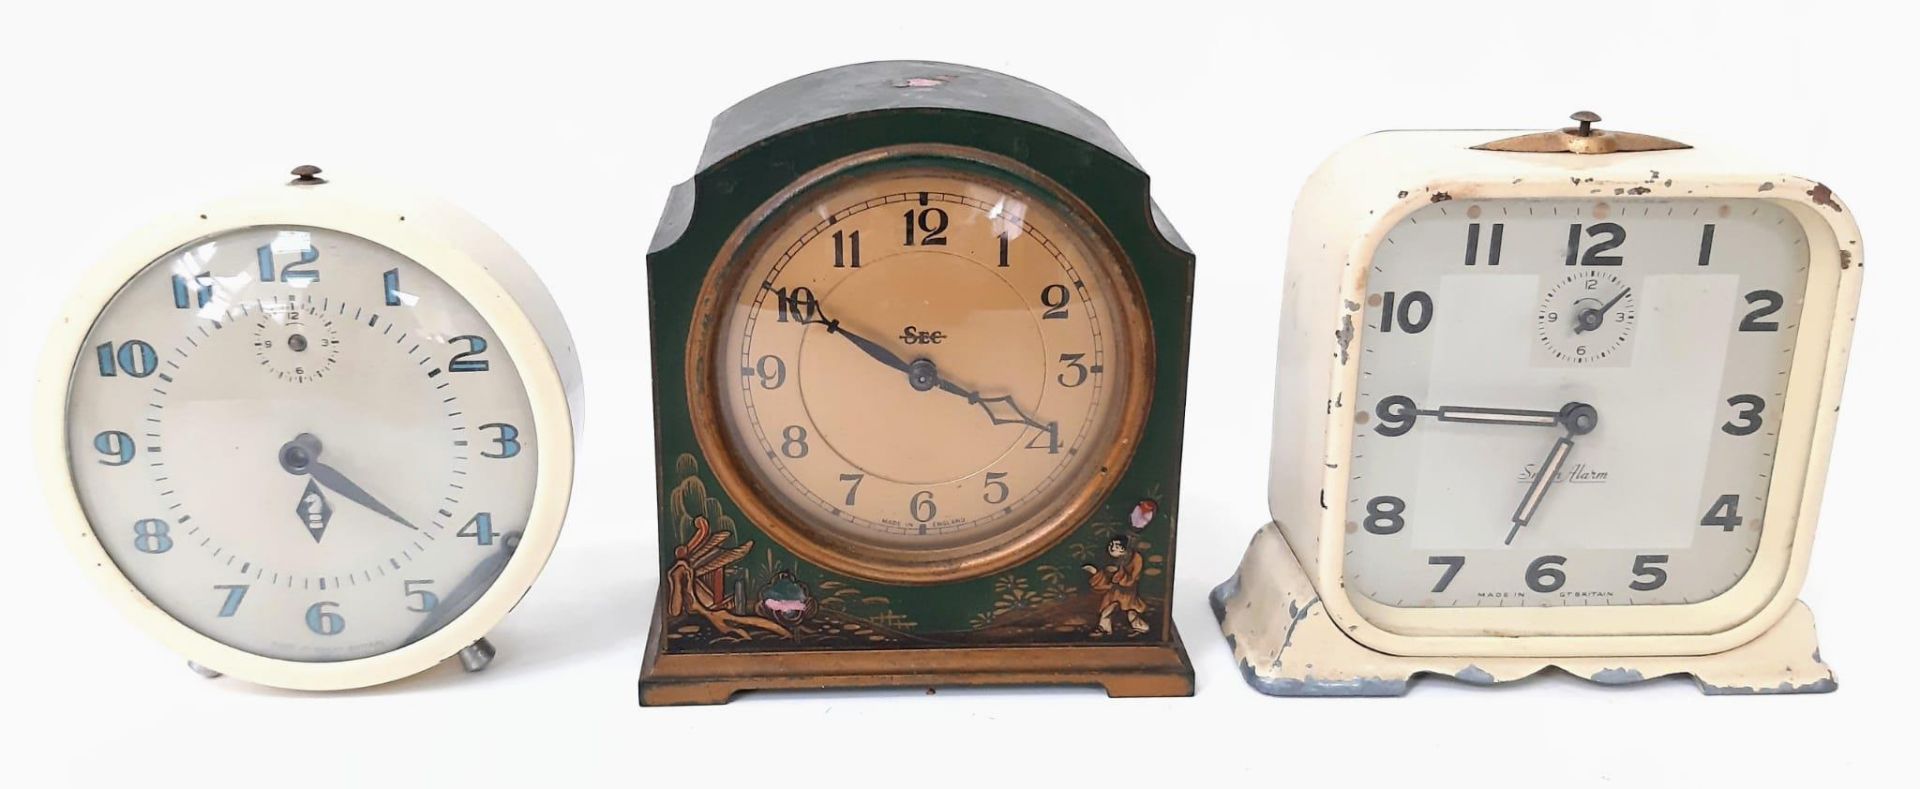 Watch time wizz by with these six vintage clocks. Five Smith's and one Bentima all fixed to unwind - Image 2 of 5